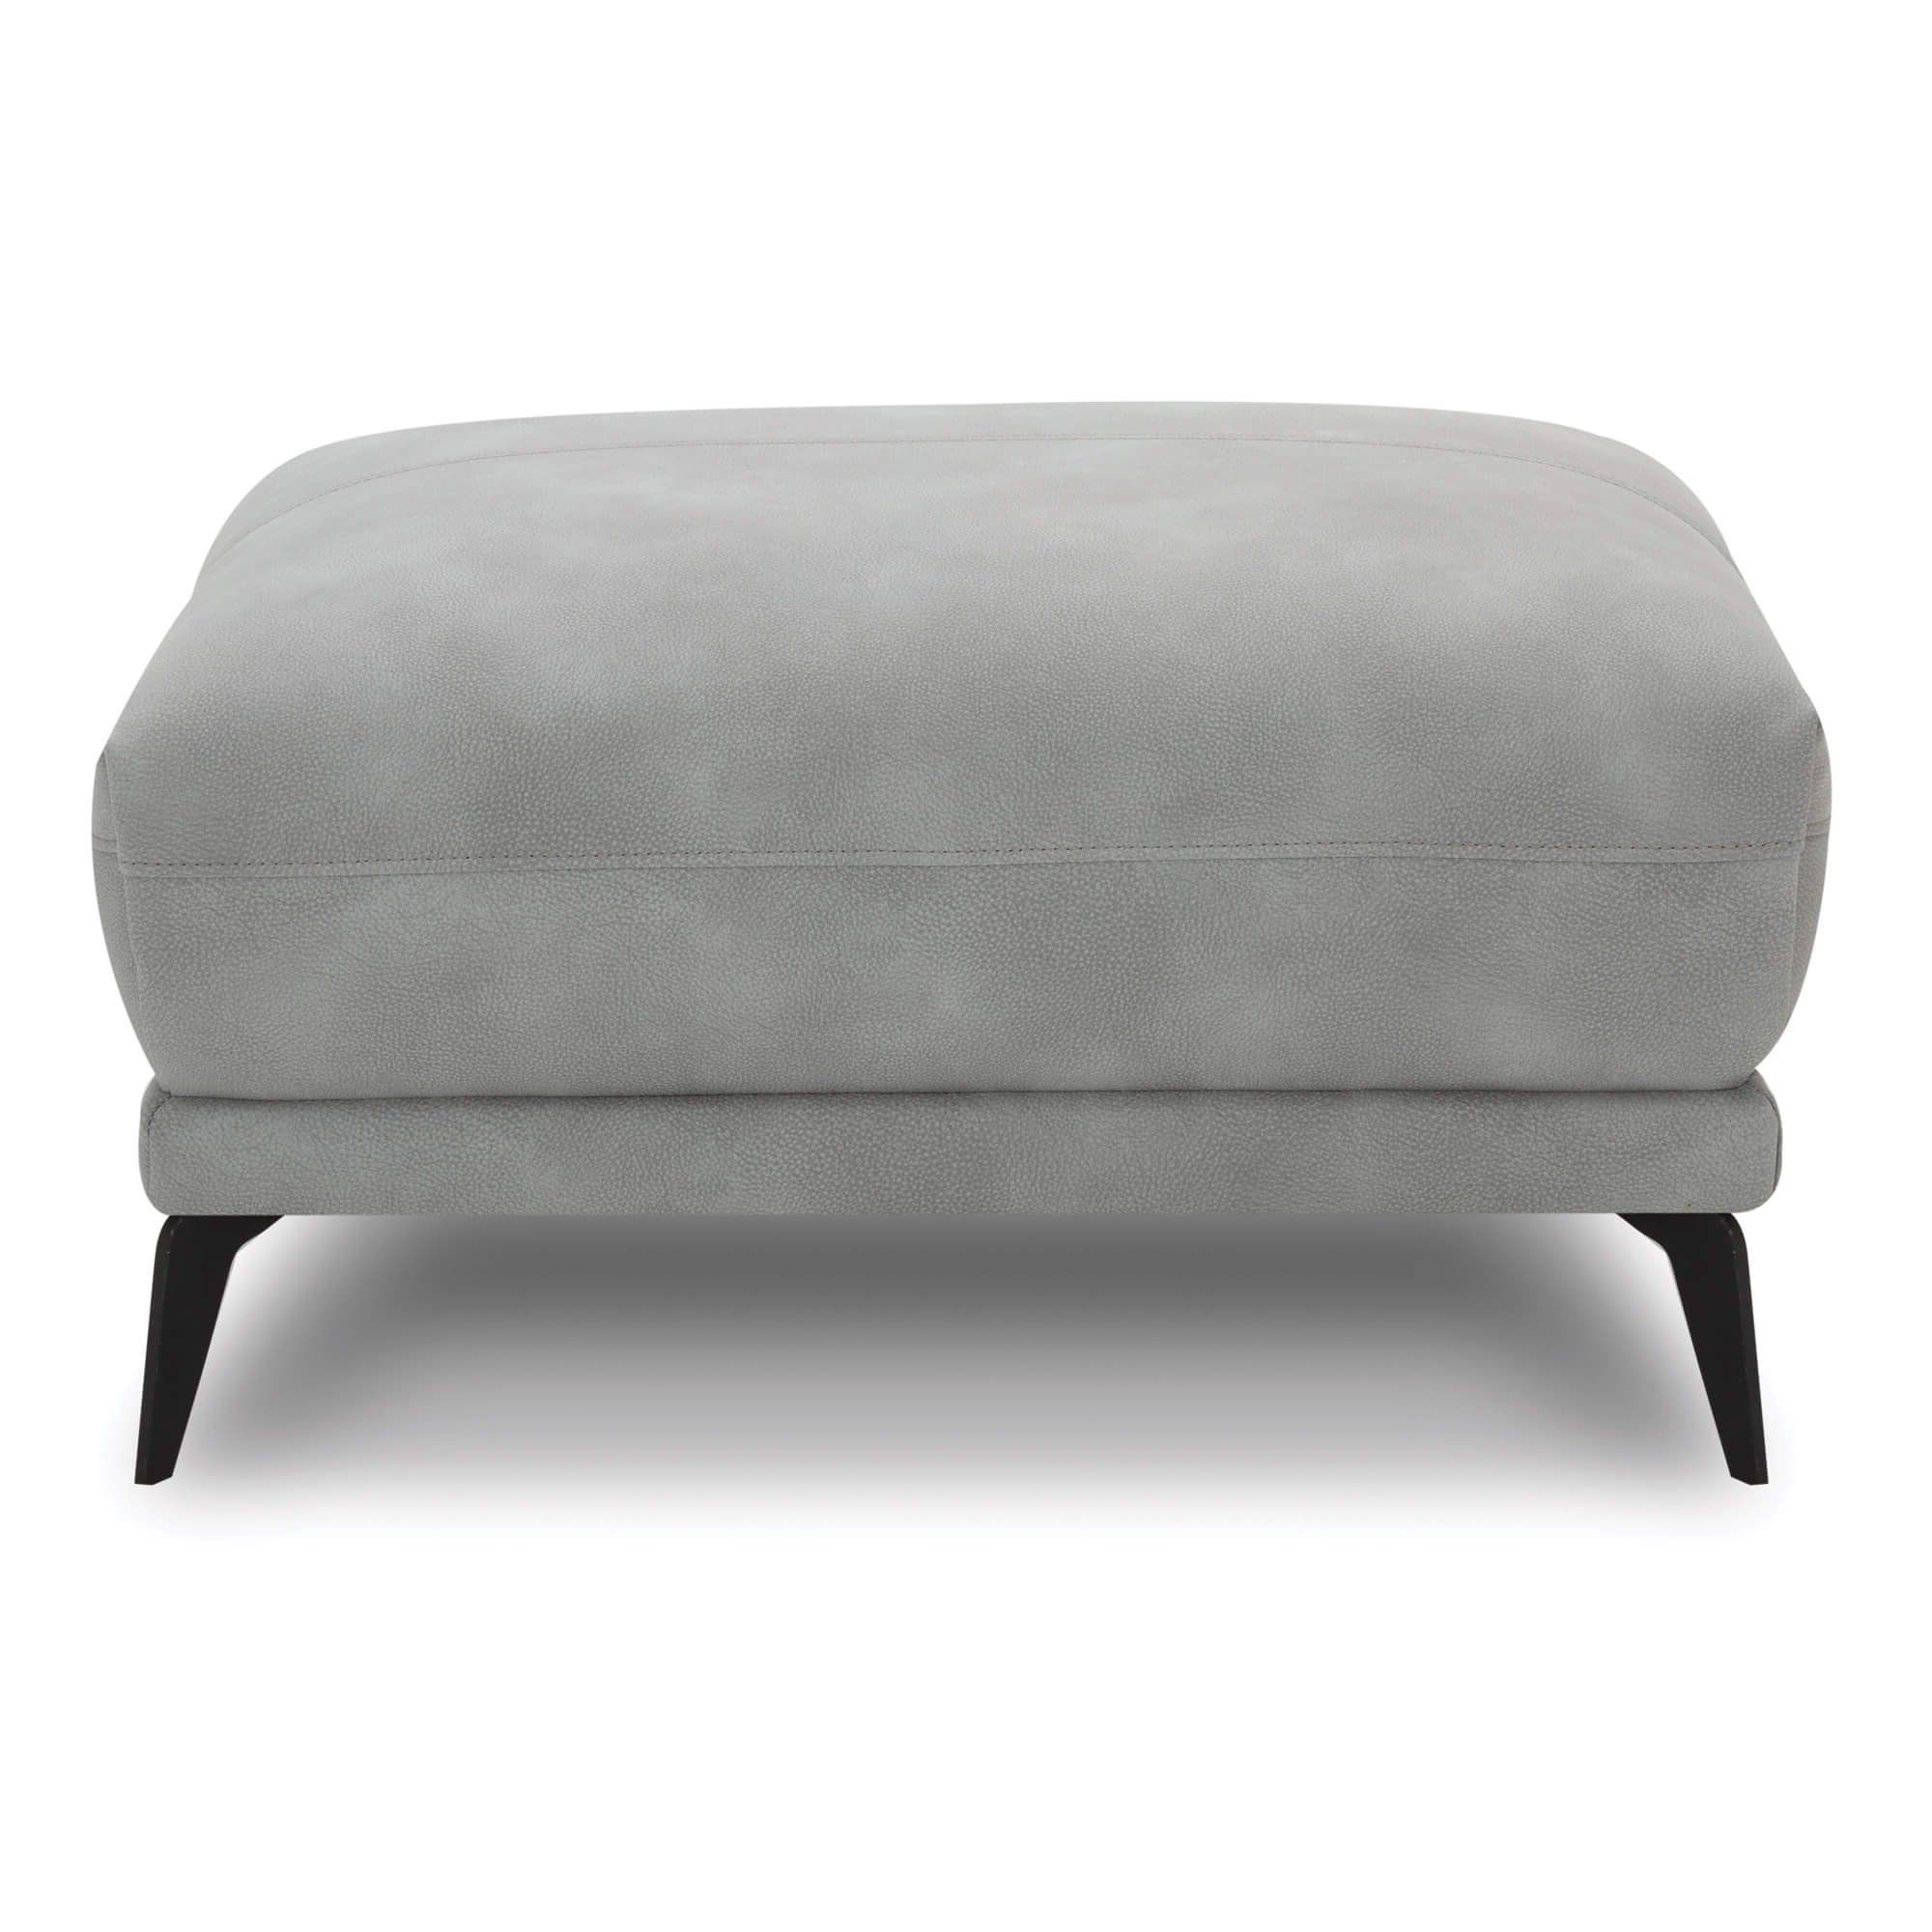 Matte Grey Ottomans Within Most Up To Date Casper Grey Fabric Ottoman (View 3 of 10)